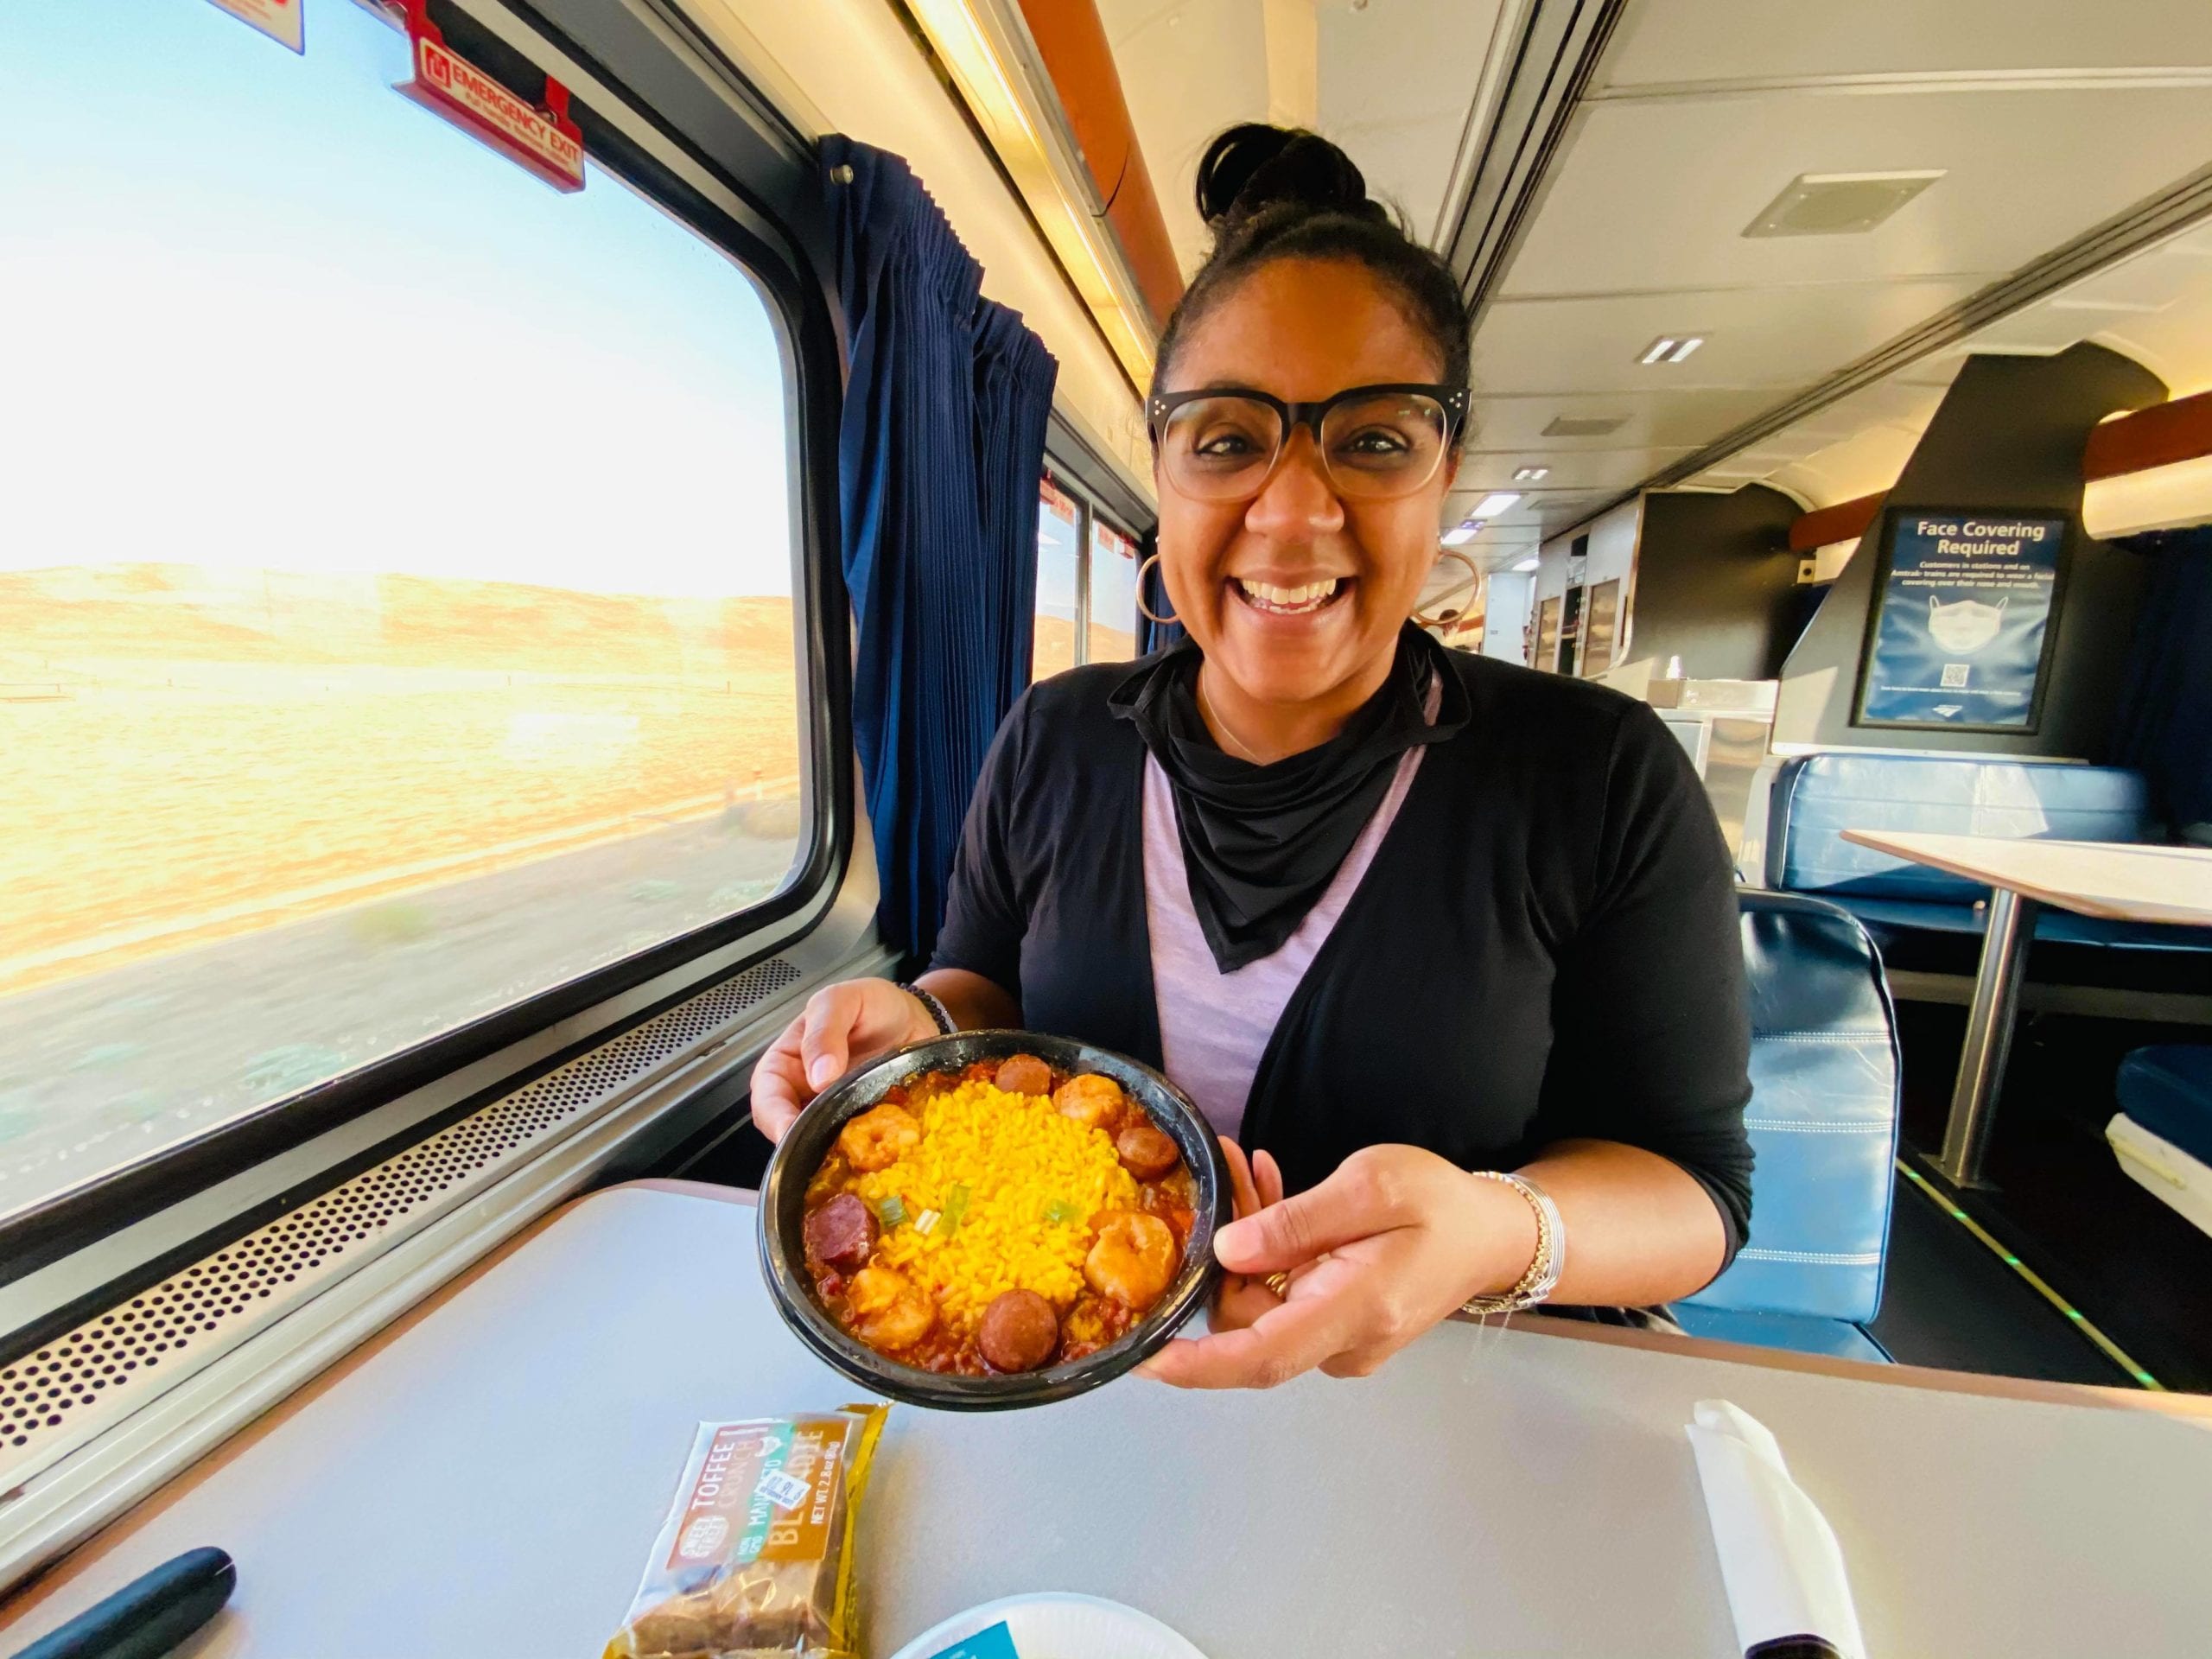 Amtrak Dining Car Menu Review: All Of Your Food Options Explained |  Grounded Life Travel